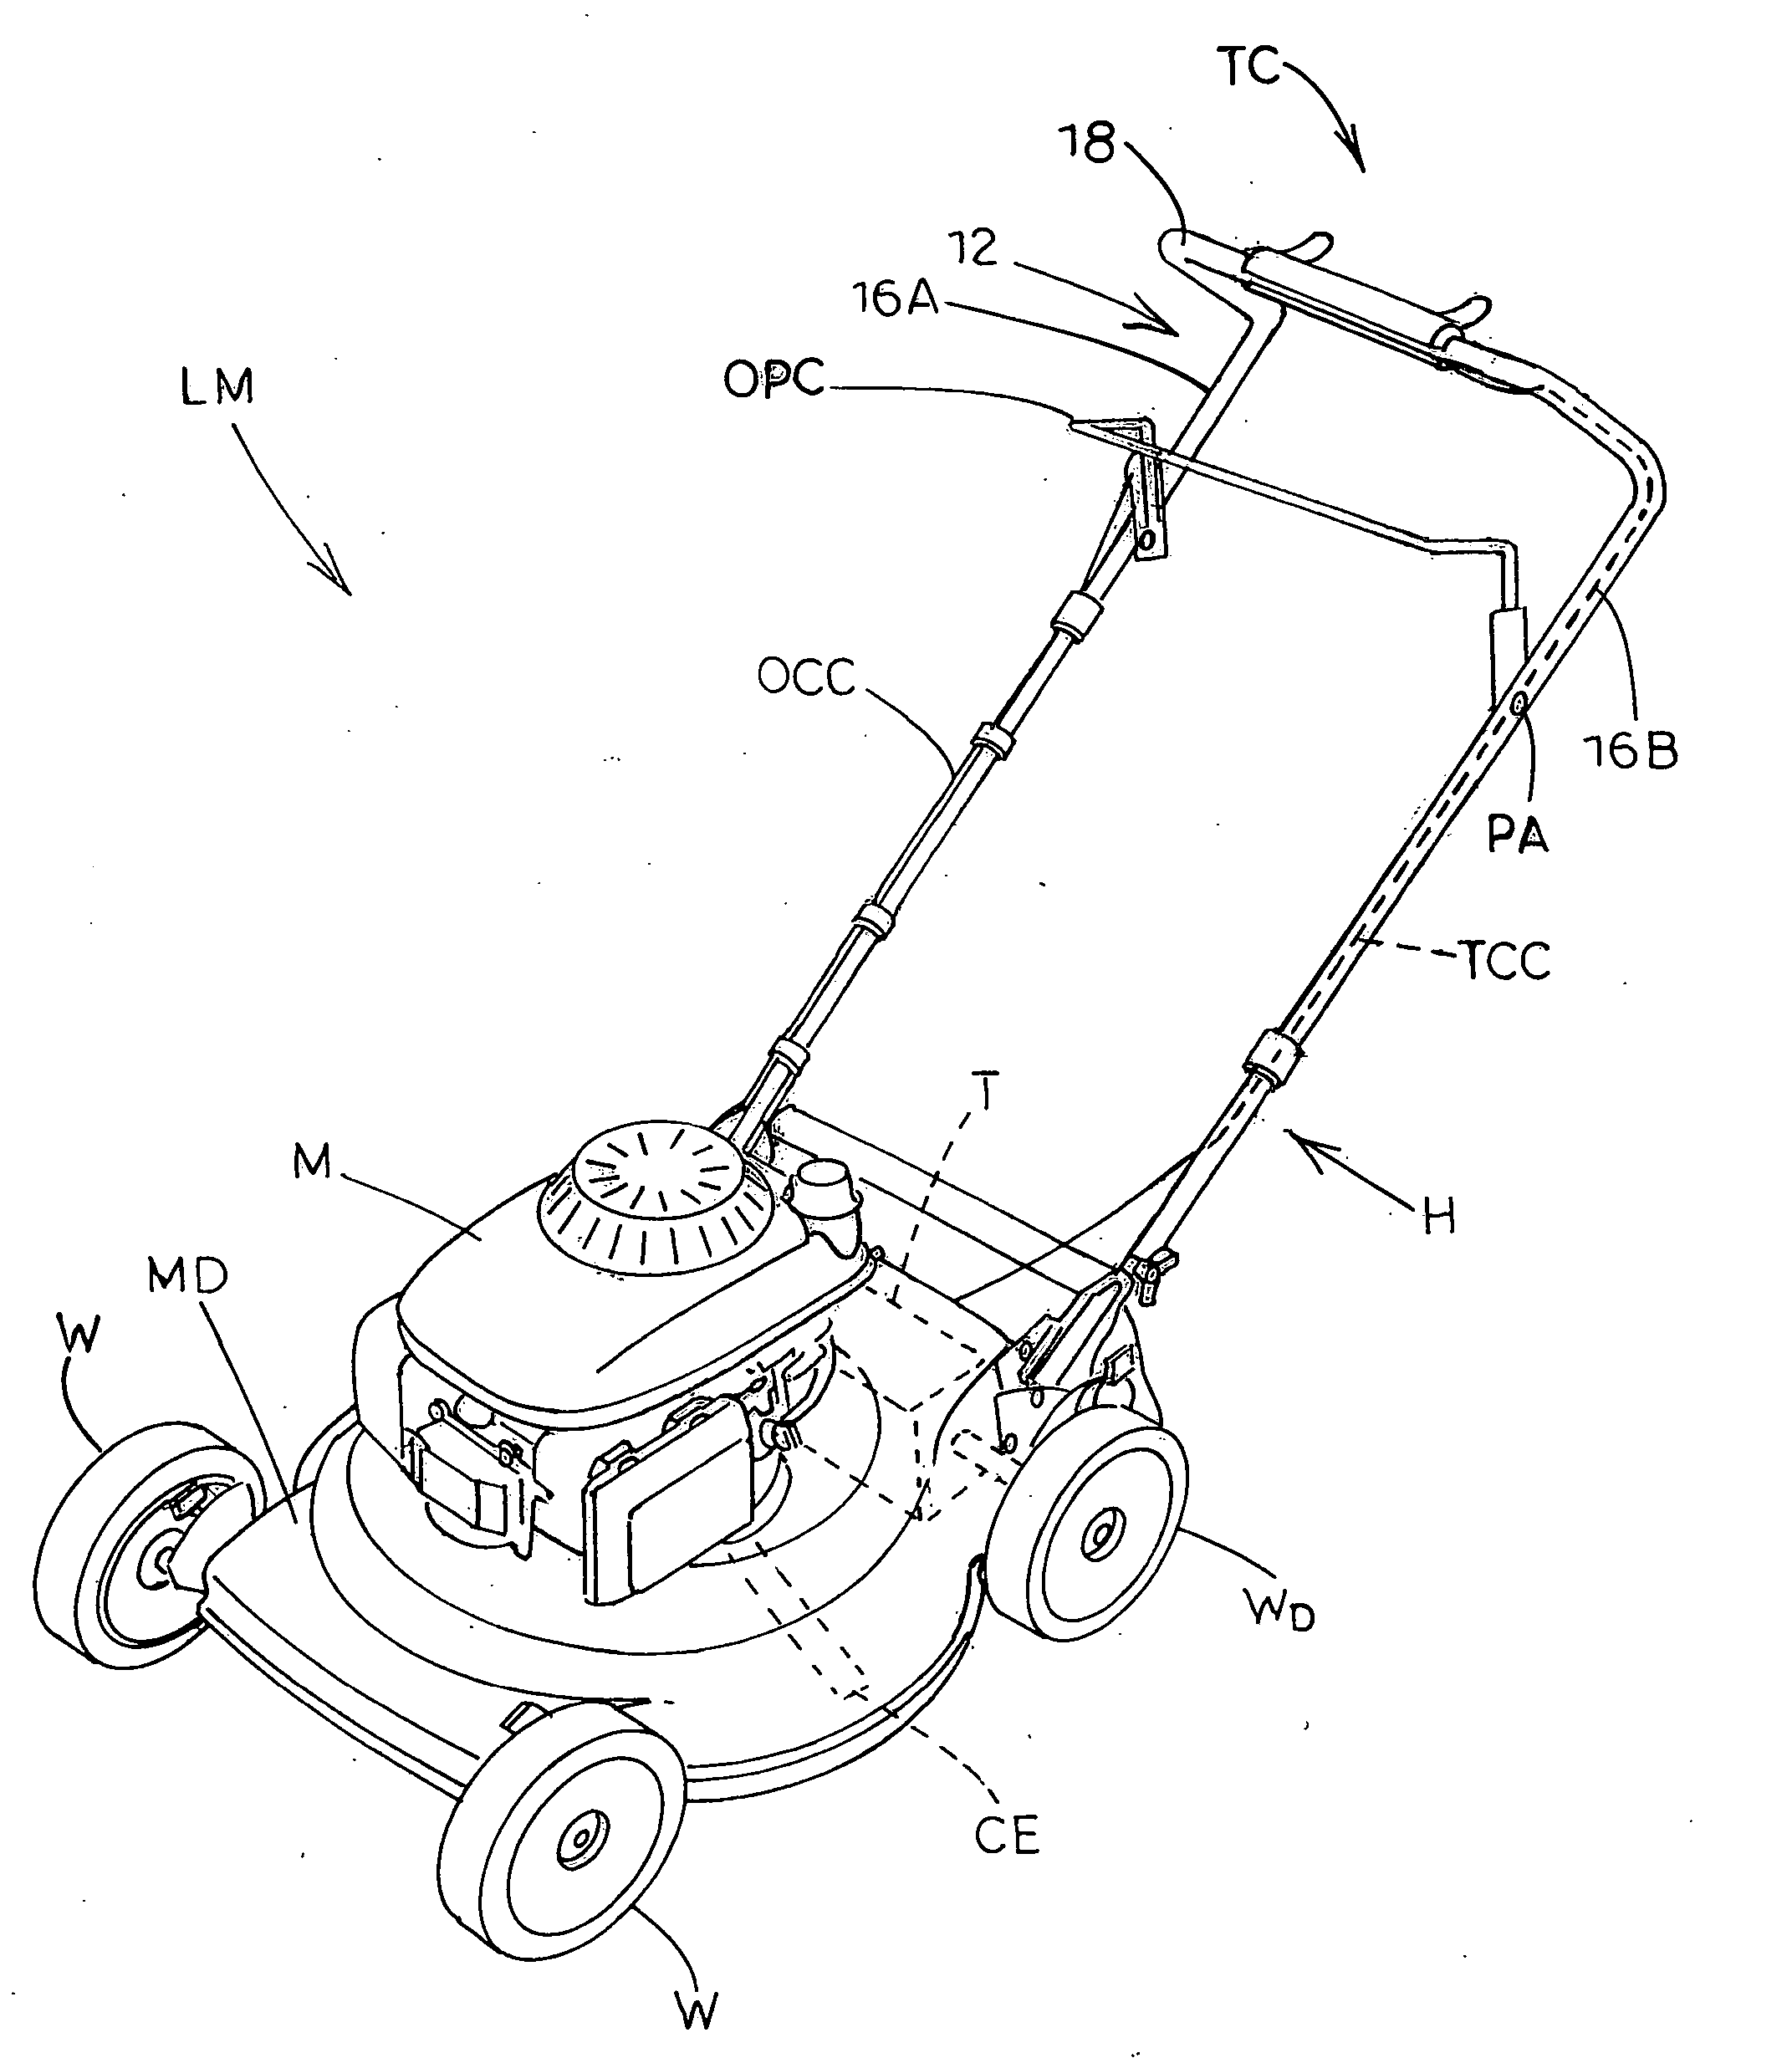 Variable speed transmission twist-grip throttle control apparatuses and methods for self-propelled mowing machine